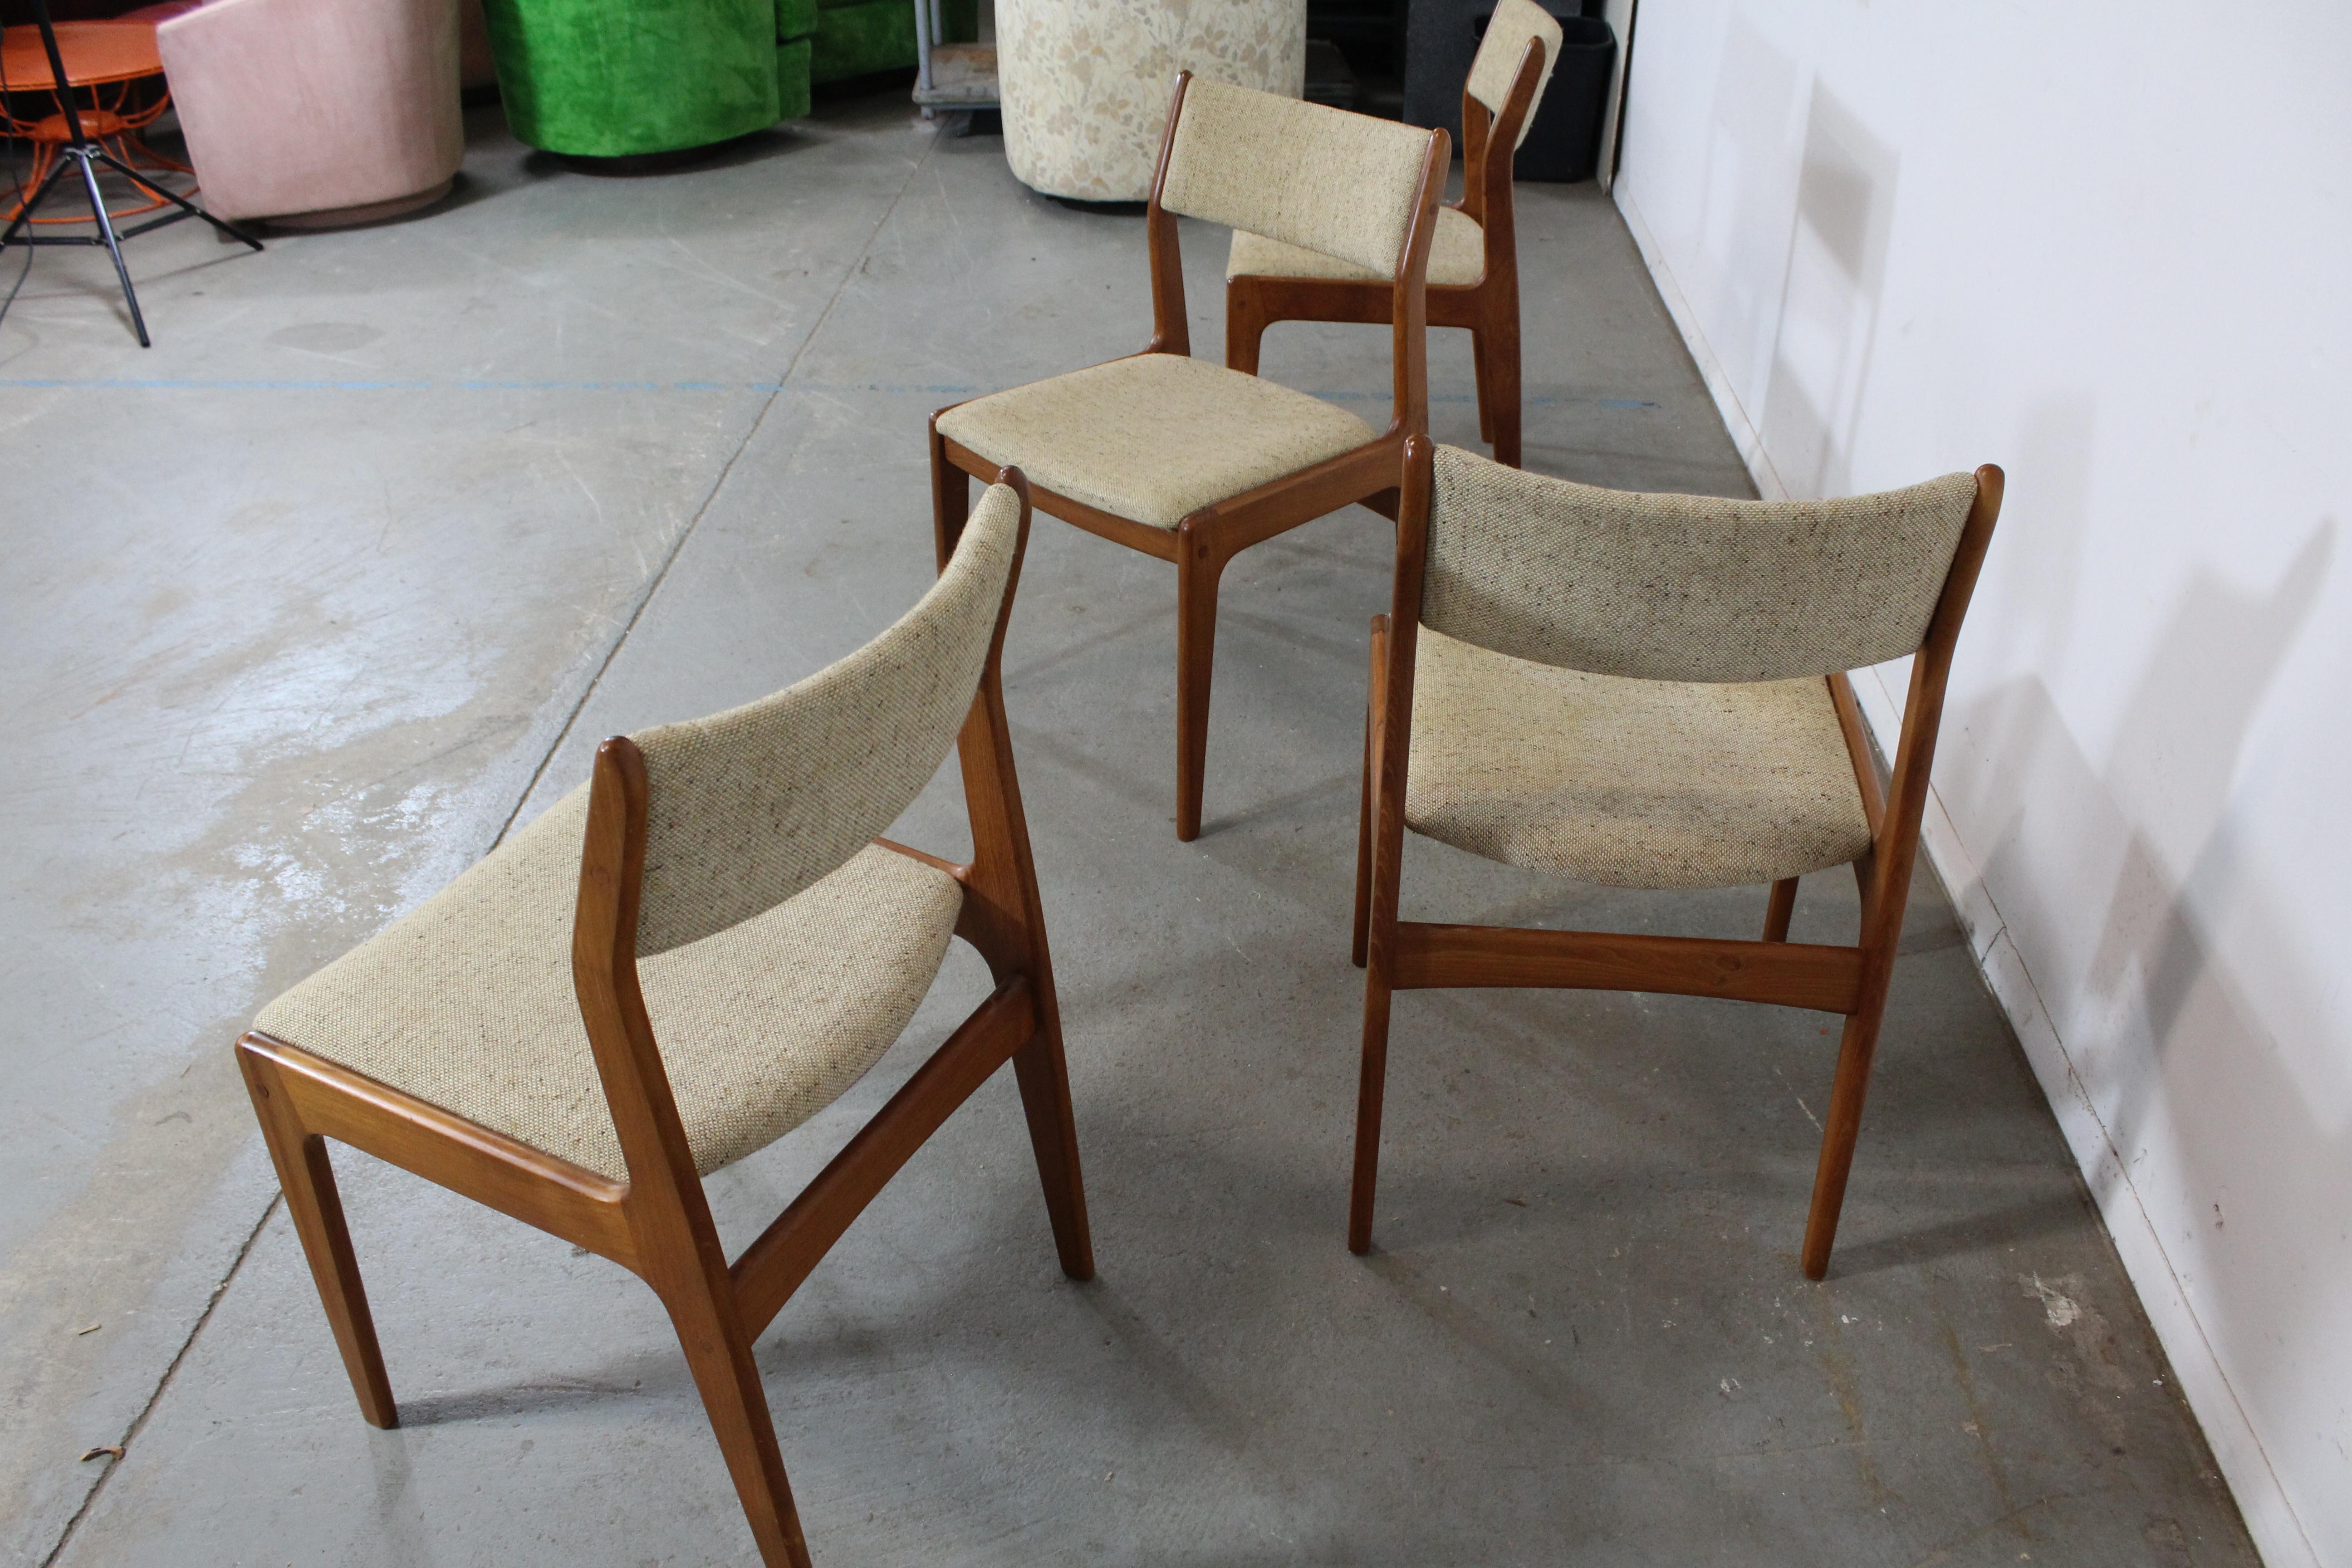 20th Century Set of 4 Danish Modern Teak Side Dining Chairs by D-Scan